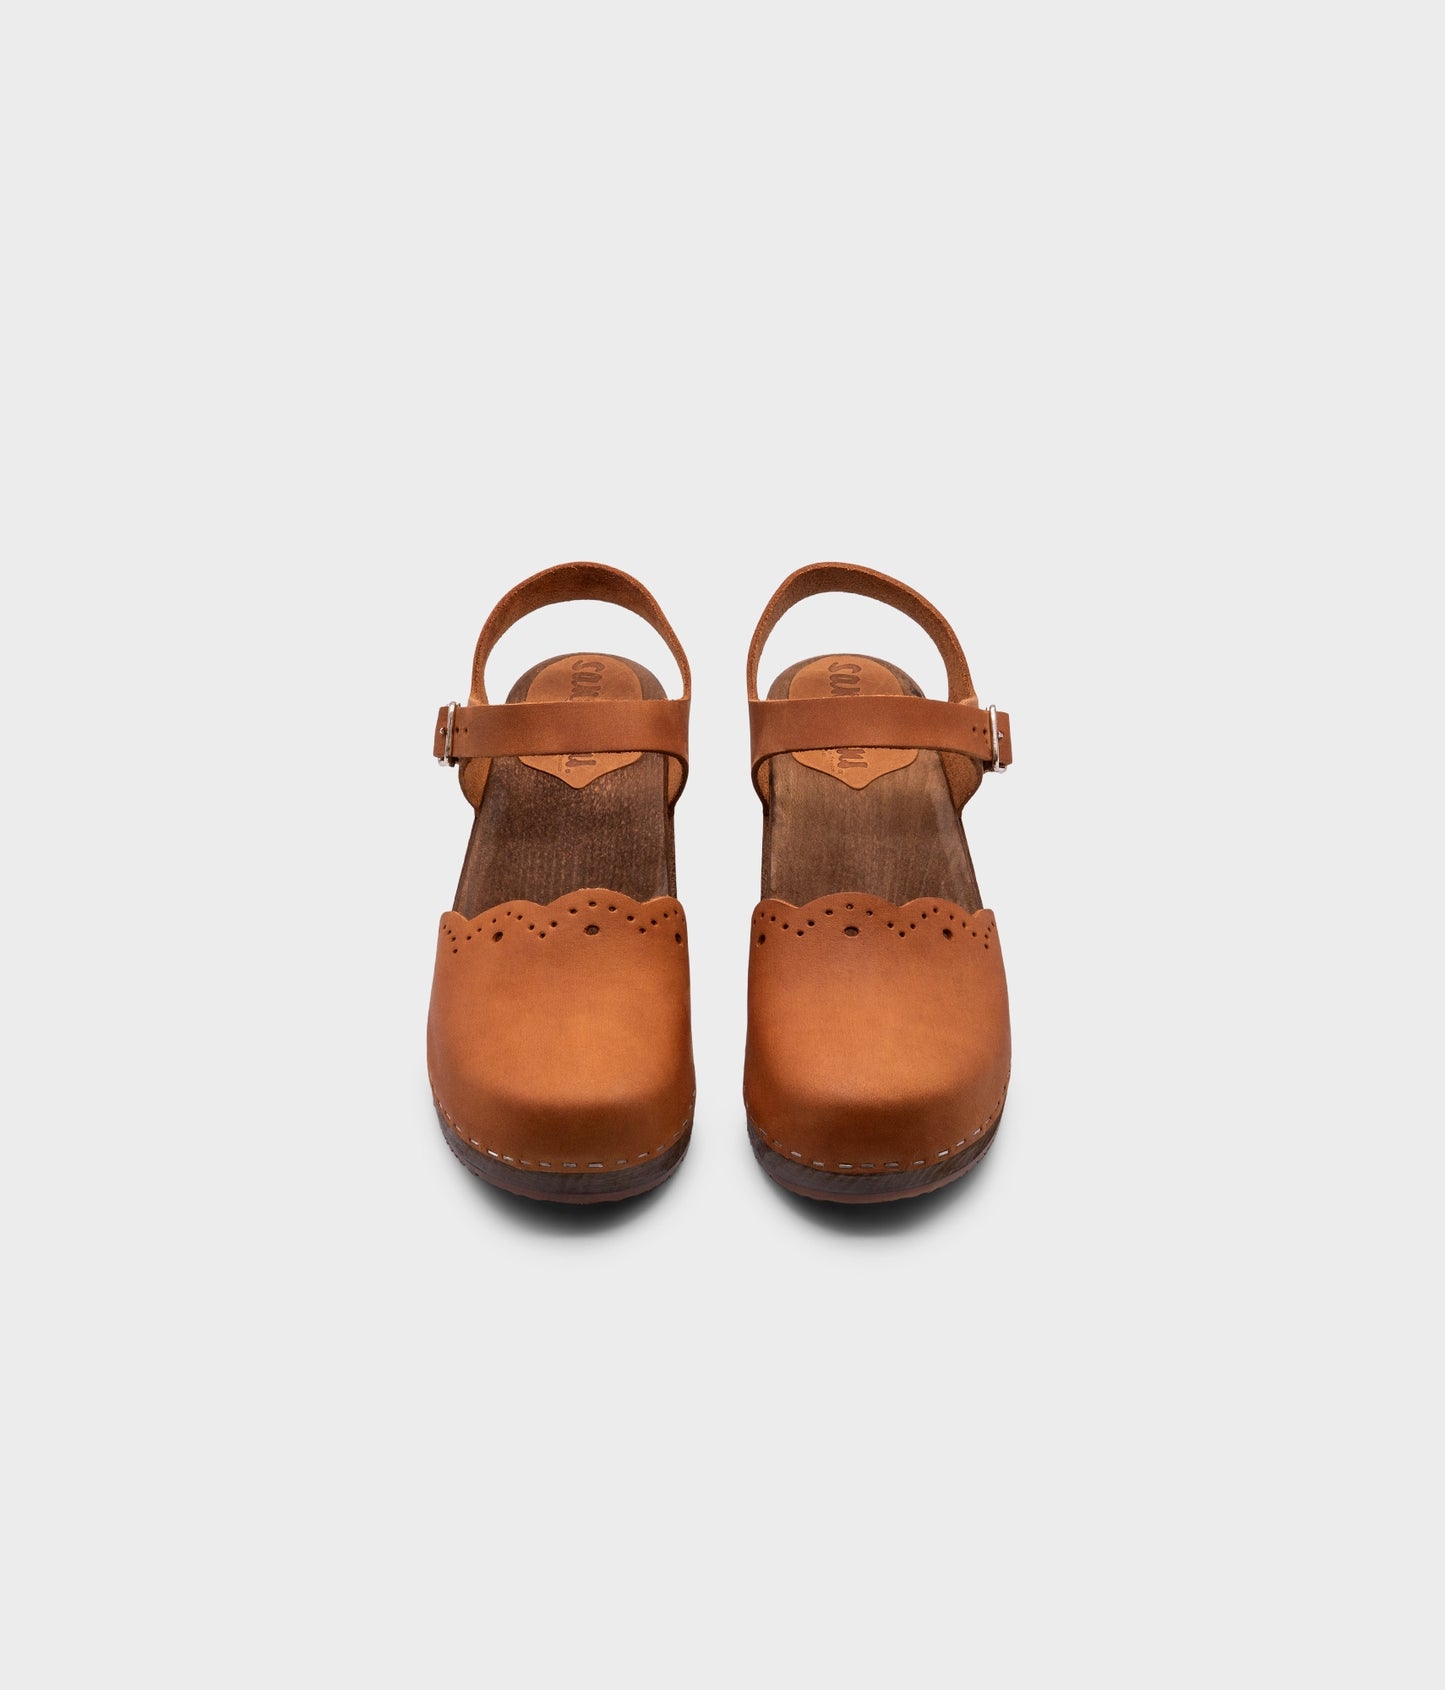 low heeled closed-toe clog sandals in light brown nubuck leather with a wavy leather cutout stapled on a dark wooden base